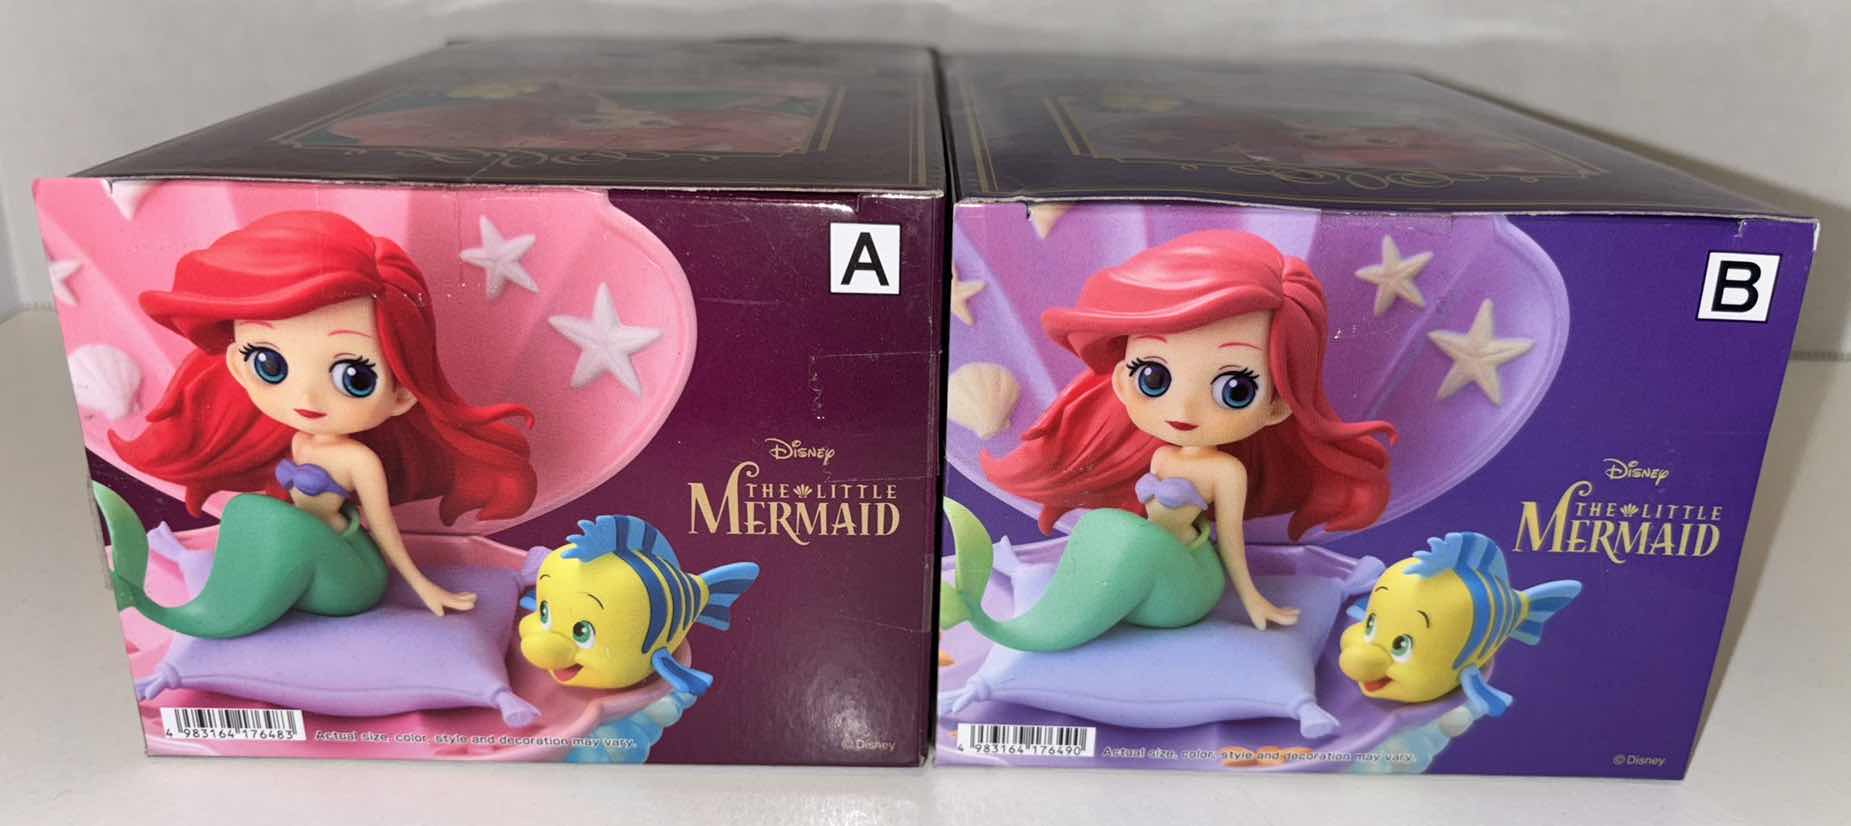 Photo 4 of NEW BANDAI Q POSKET STORIES, 2-PACK THE LITTLE MERMAID STATUE VERSION A (PINK) & VERSION B (PURPLE)